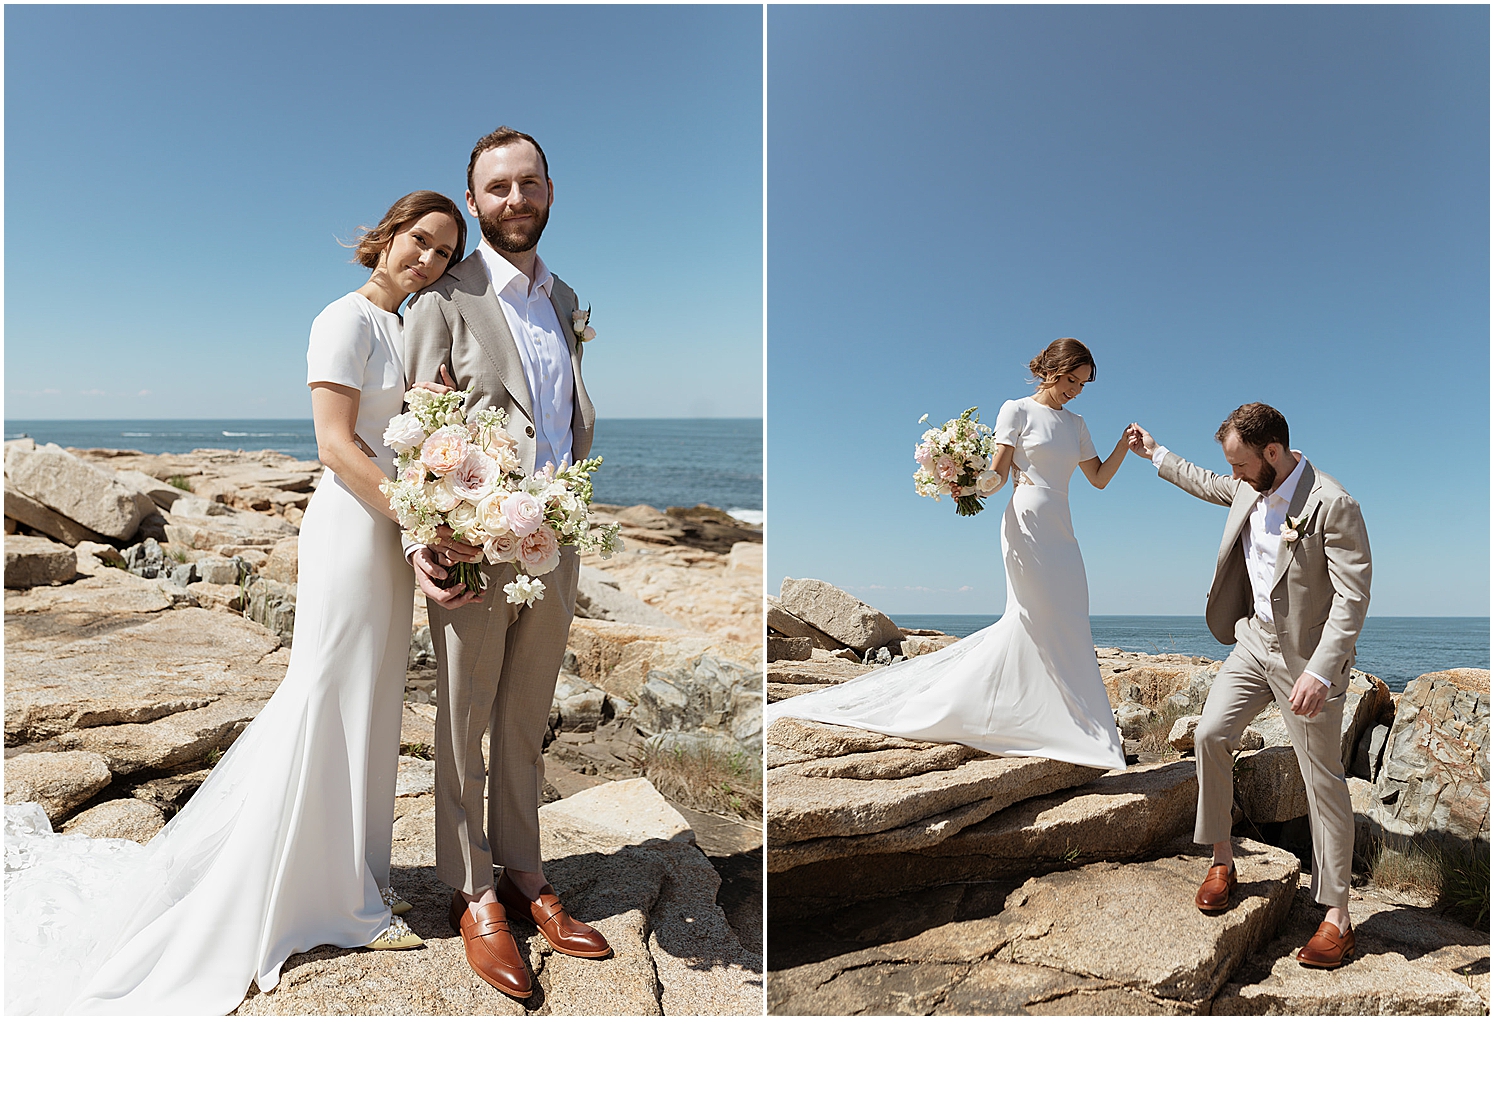 Bride-and-groom-first-look-by-the-ocean-at-Rockport-MA-wedding